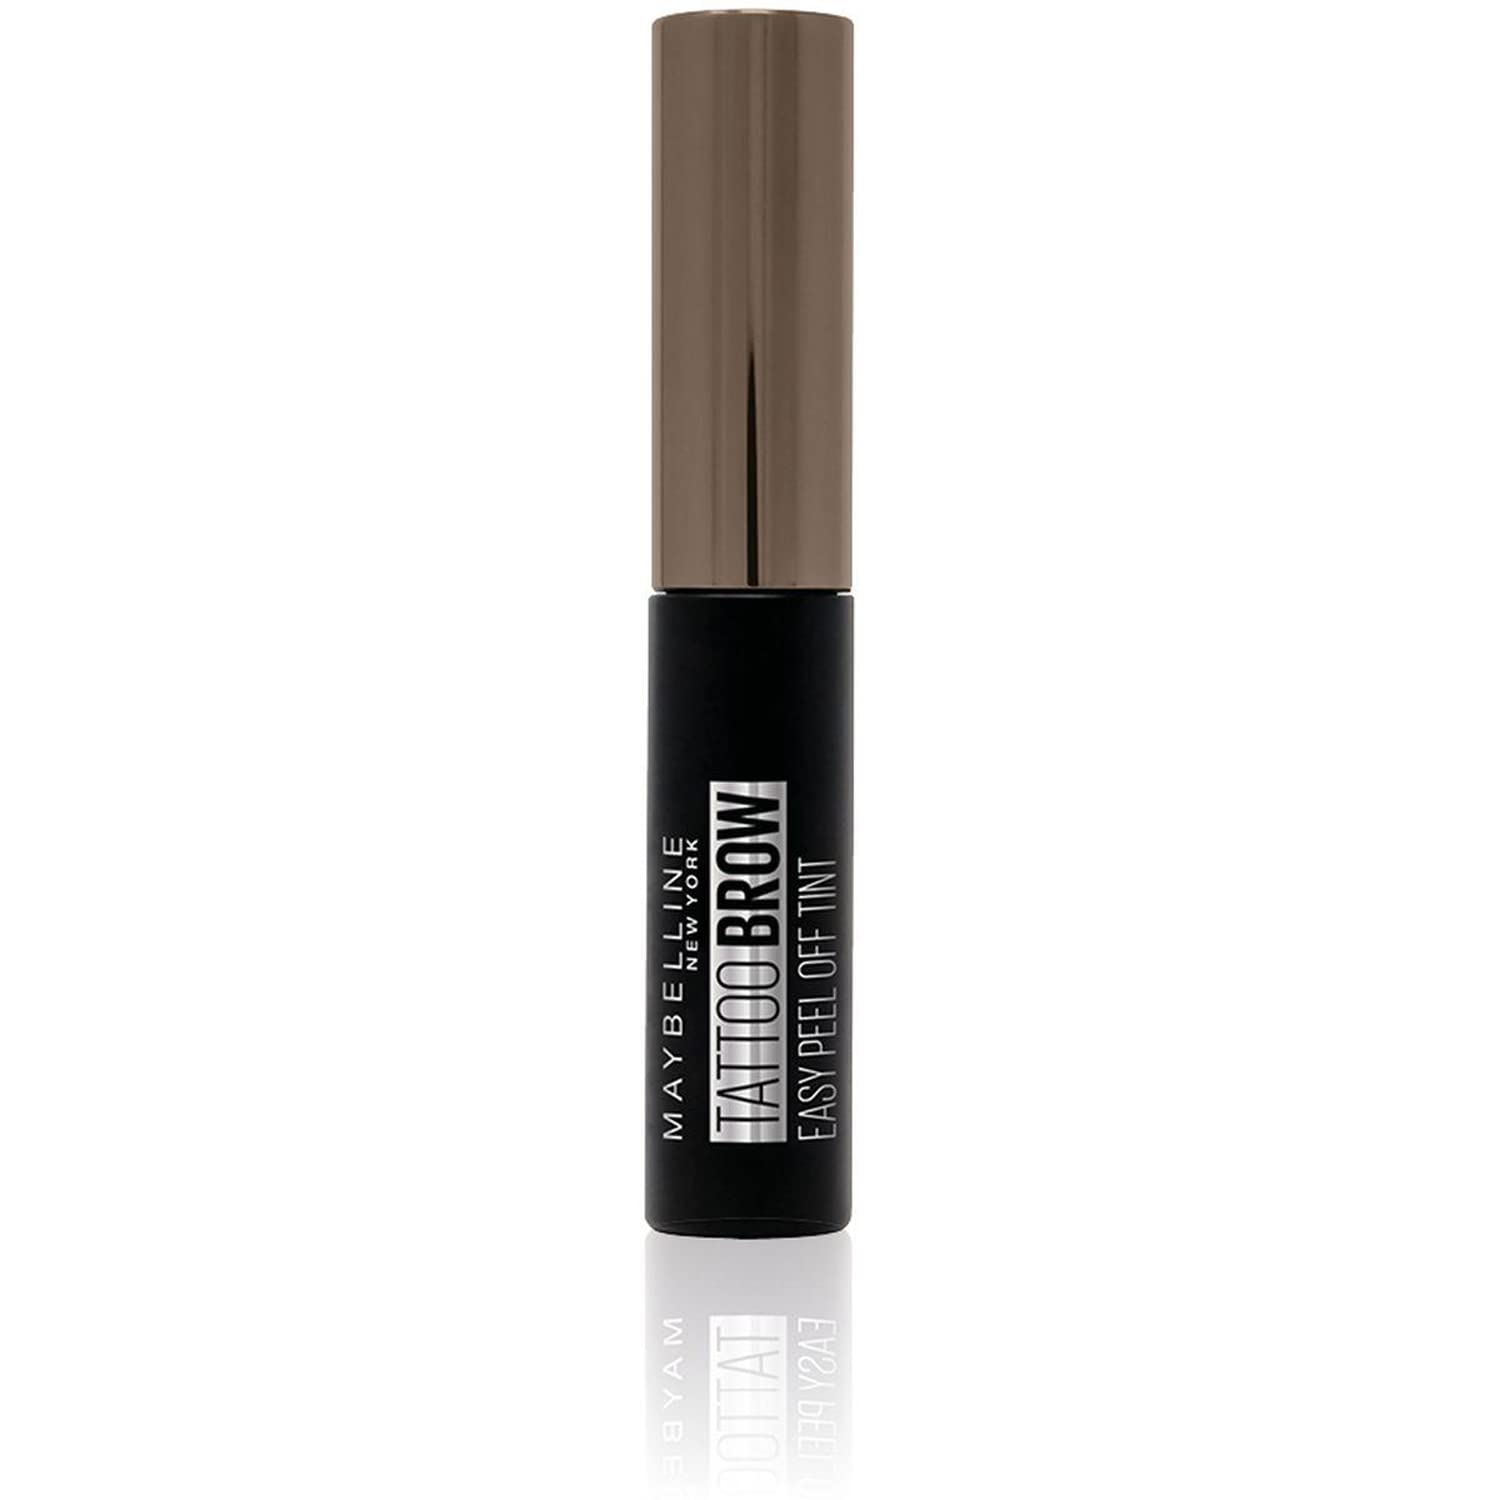 Maybelline Tattoo Brow Longlasting Peel Off Semi Permanent Gel Tint Up To 3 Day Wear Chocolate Brown